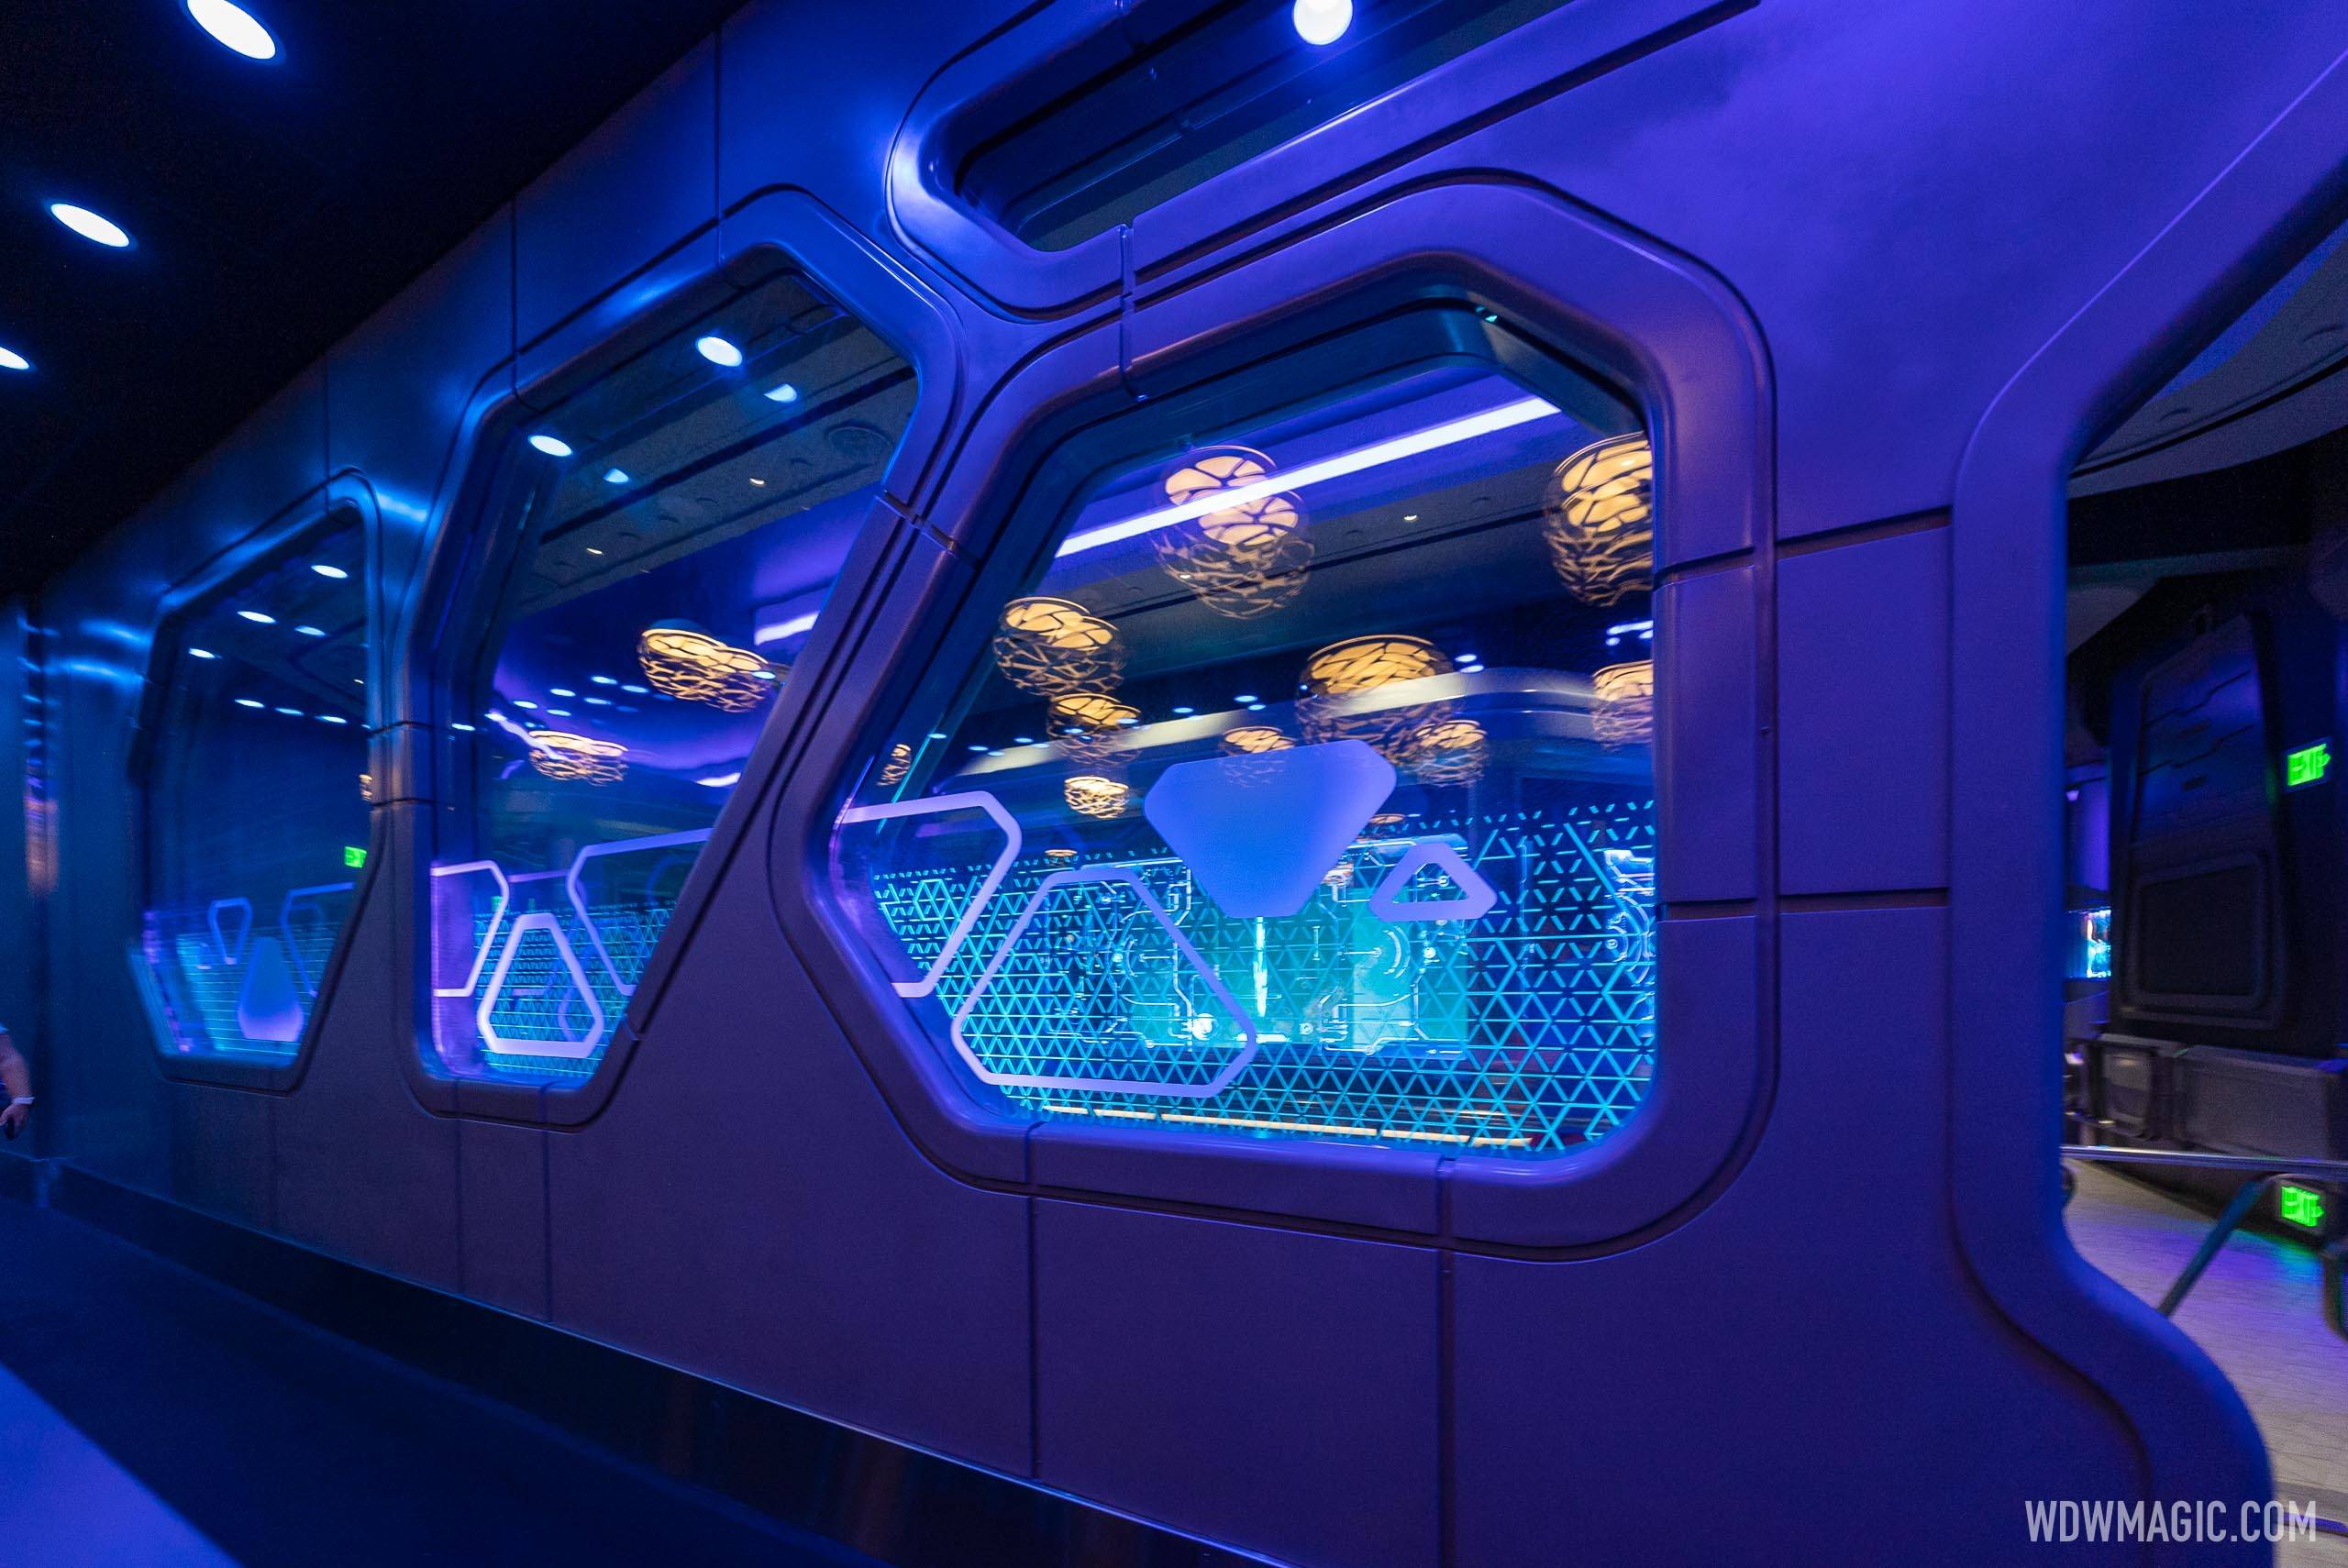 The Wonders of Xandar Gallery queue space used for virtual queue and future standby line